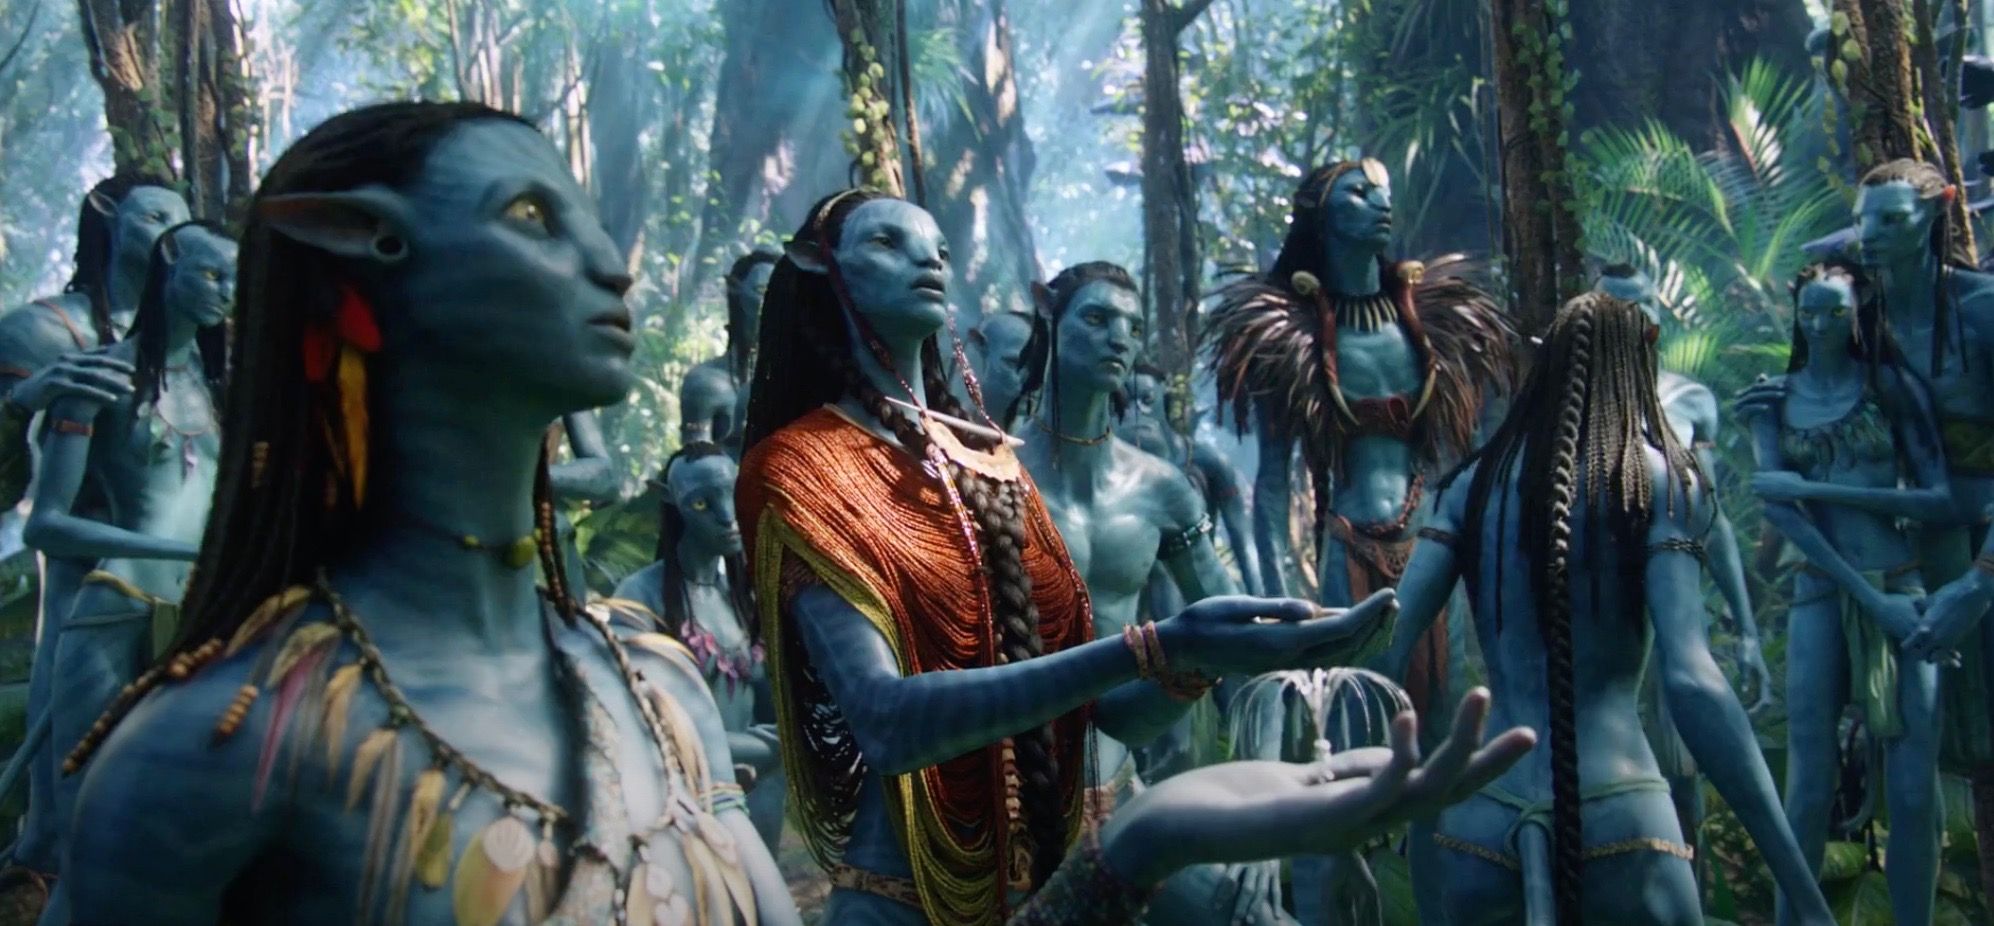 Sam Worthington with Neytiri and the rest of the Na'vi praying in a forest in Avatar.